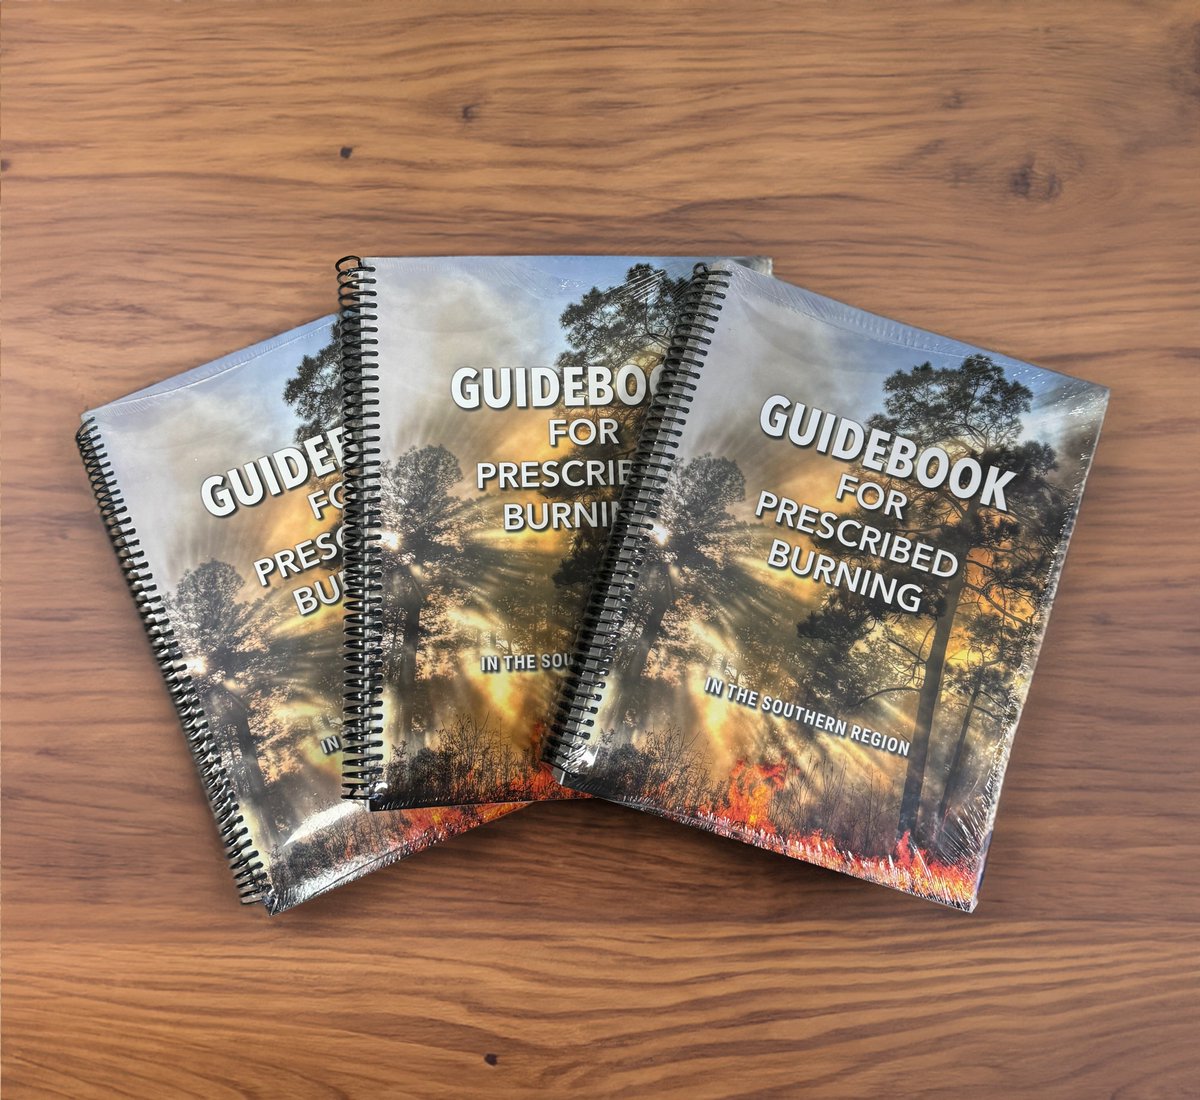 The link to purchase the Guidebook for Prescribed Burning in the Southern Region is now live!🔥 To purchase a paper copy, access the full PDF, or to share your thoughts on the guide click here: sref.info/resources/publ…